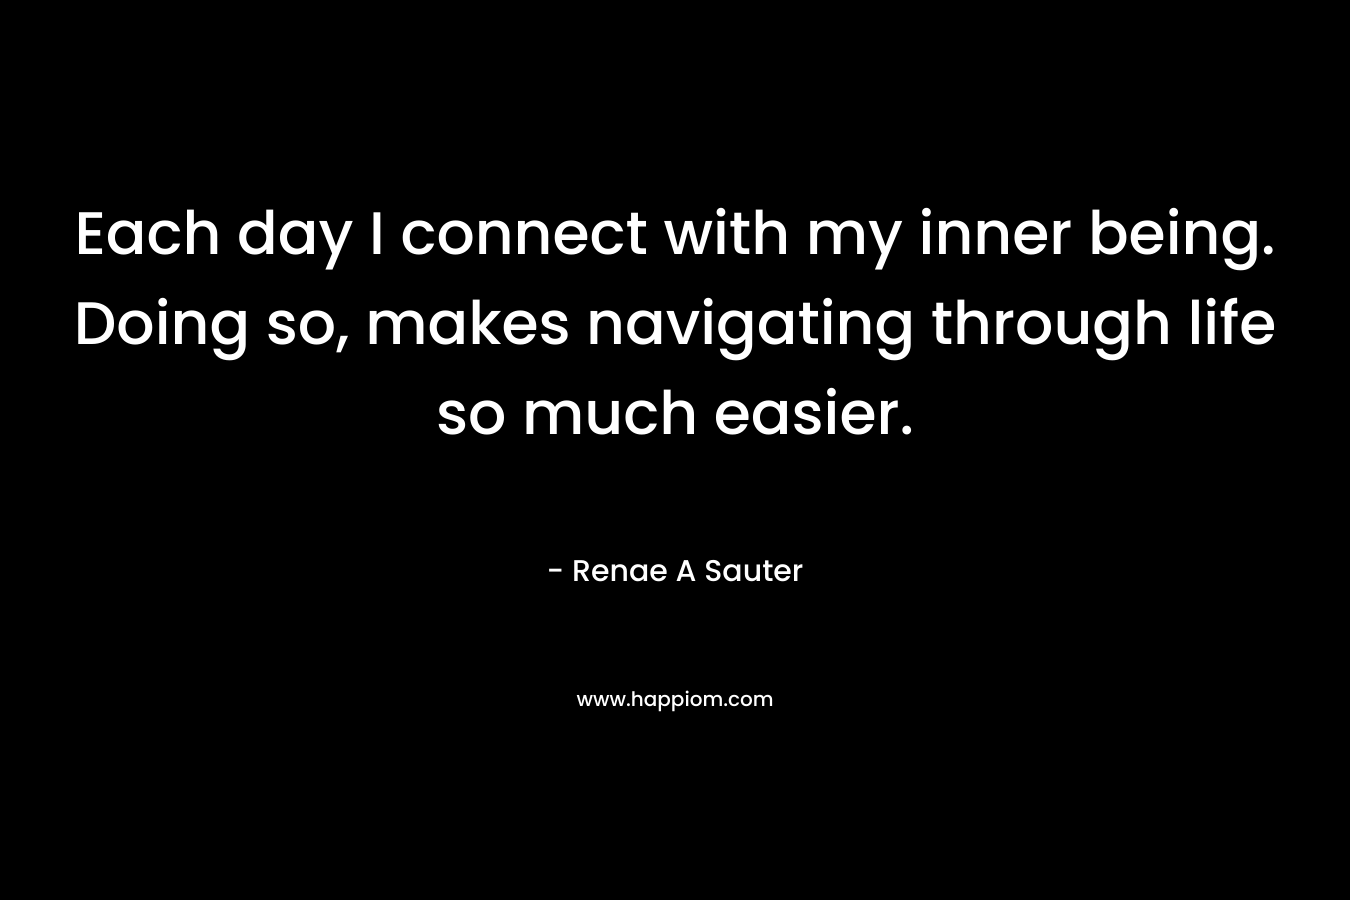 Each day I connect with my inner being. Doing so, makes navigating through life so much easier.